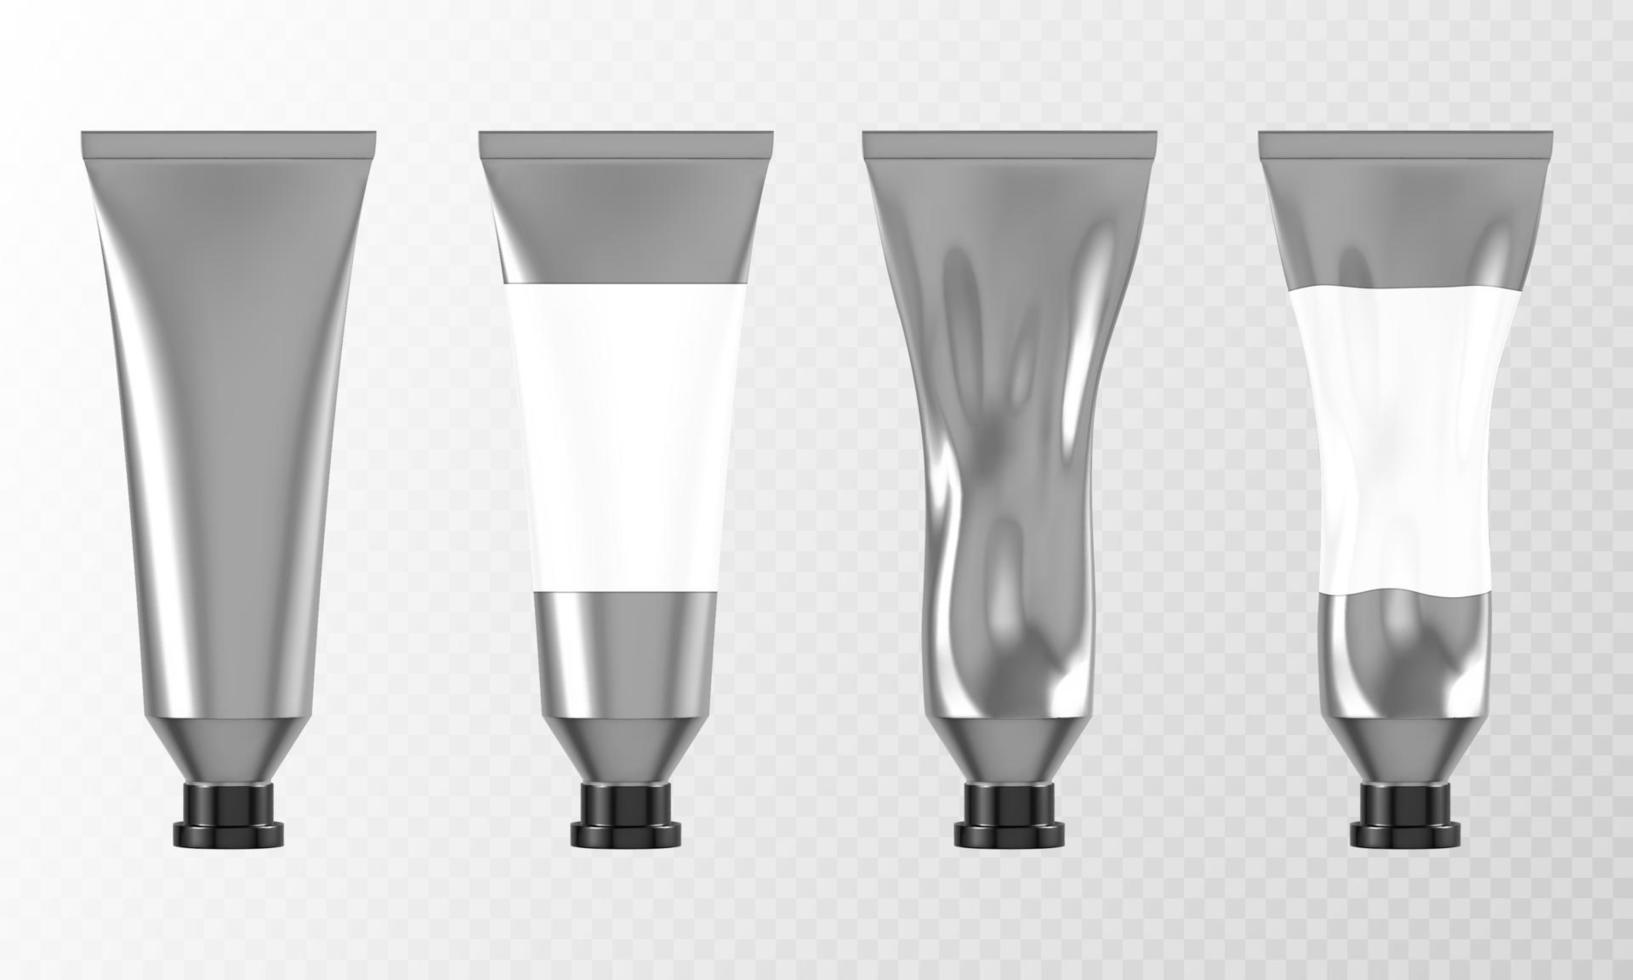 Metal tube for hand cream or paints 3d mockup vector